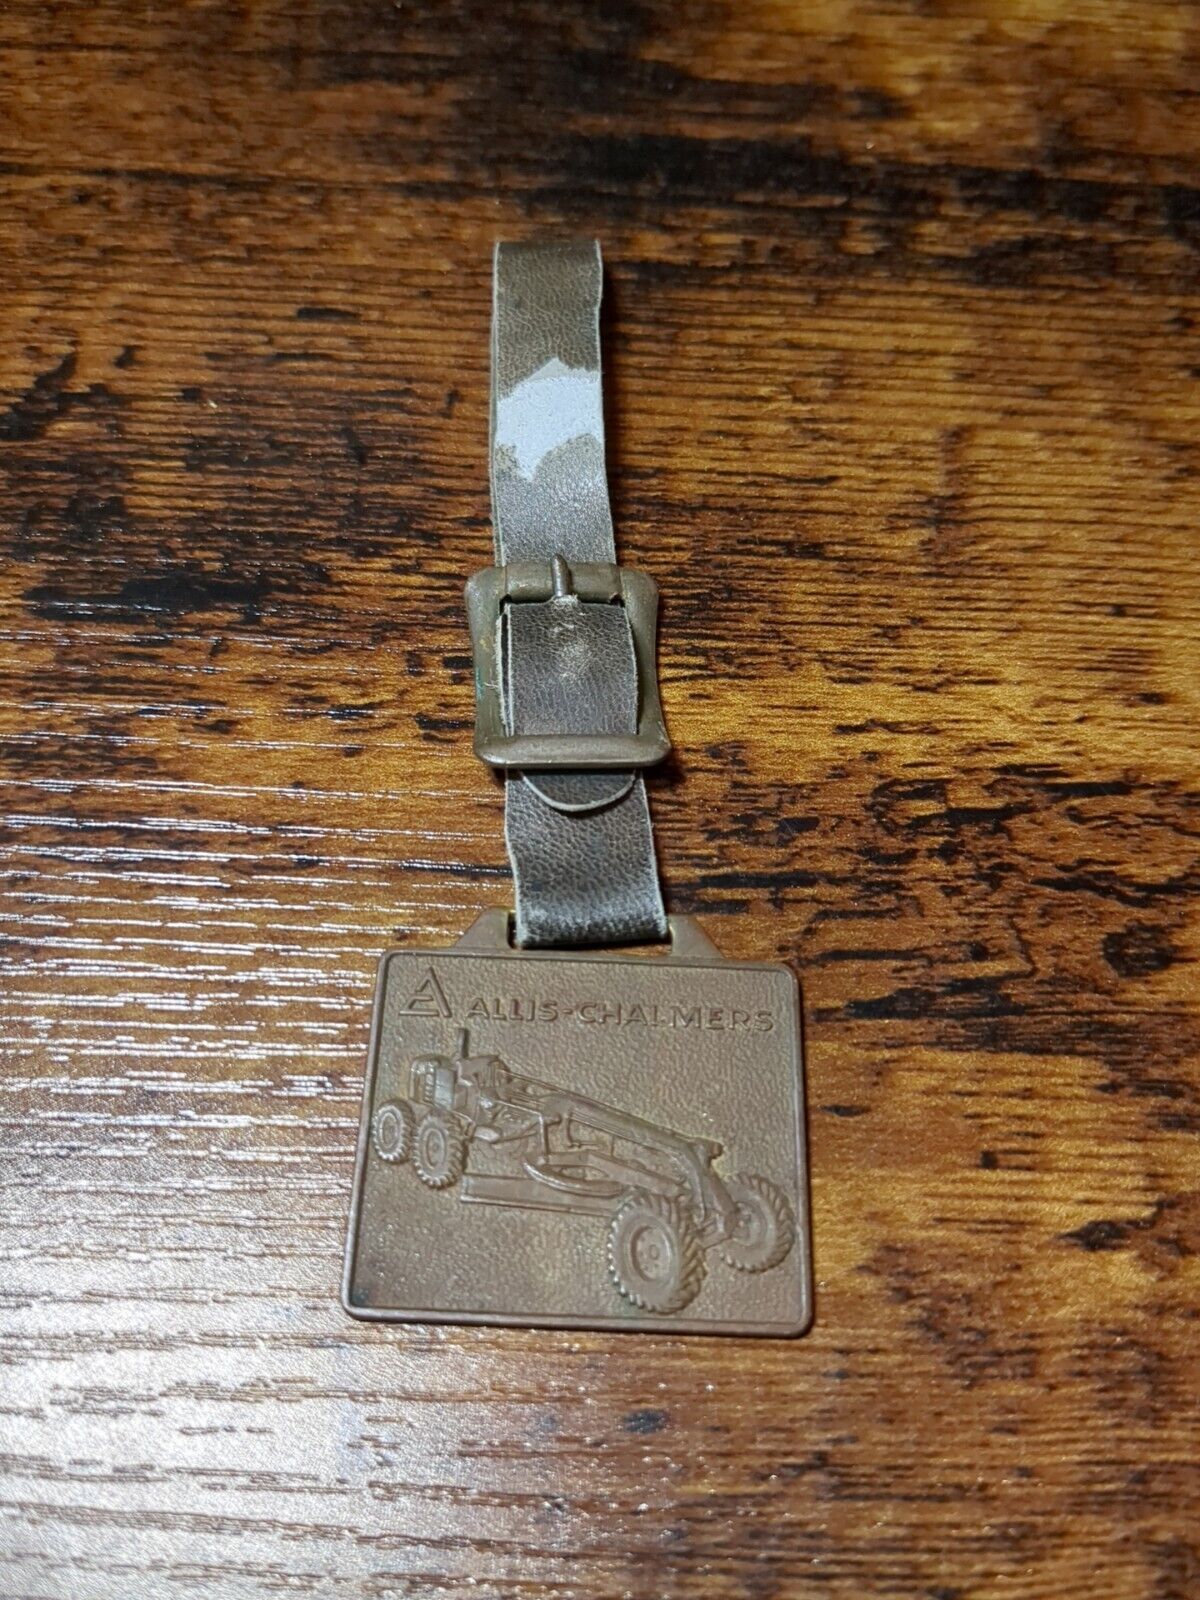 Vintage Allis Chalmers Road Grader Model D Watch Fob With Strap Patina 